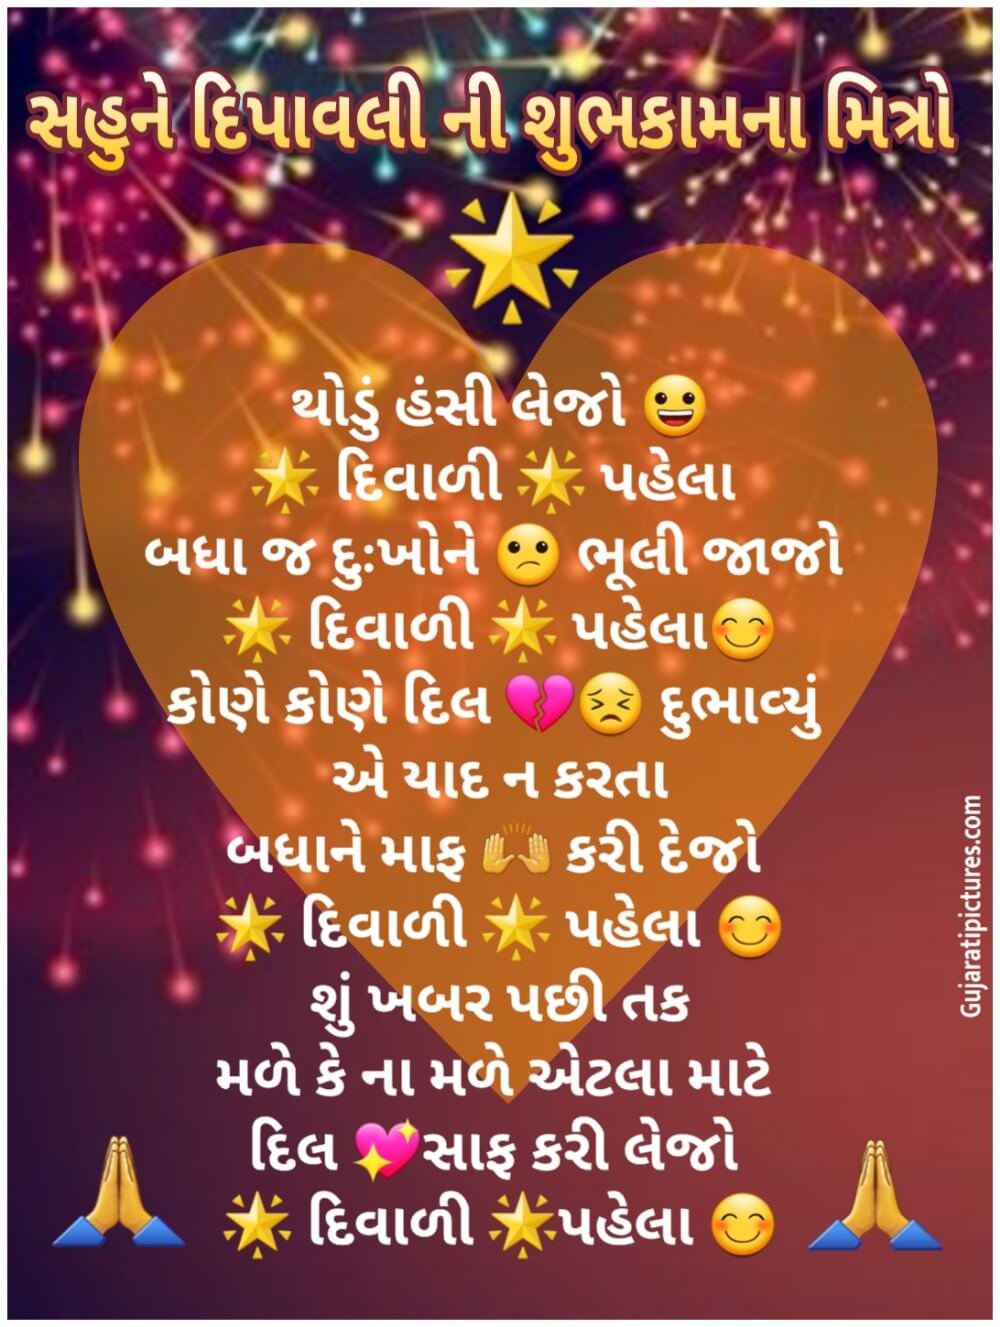 Happy Diwali in Advance - Gujarati Pictures – Website Dedicated to ...